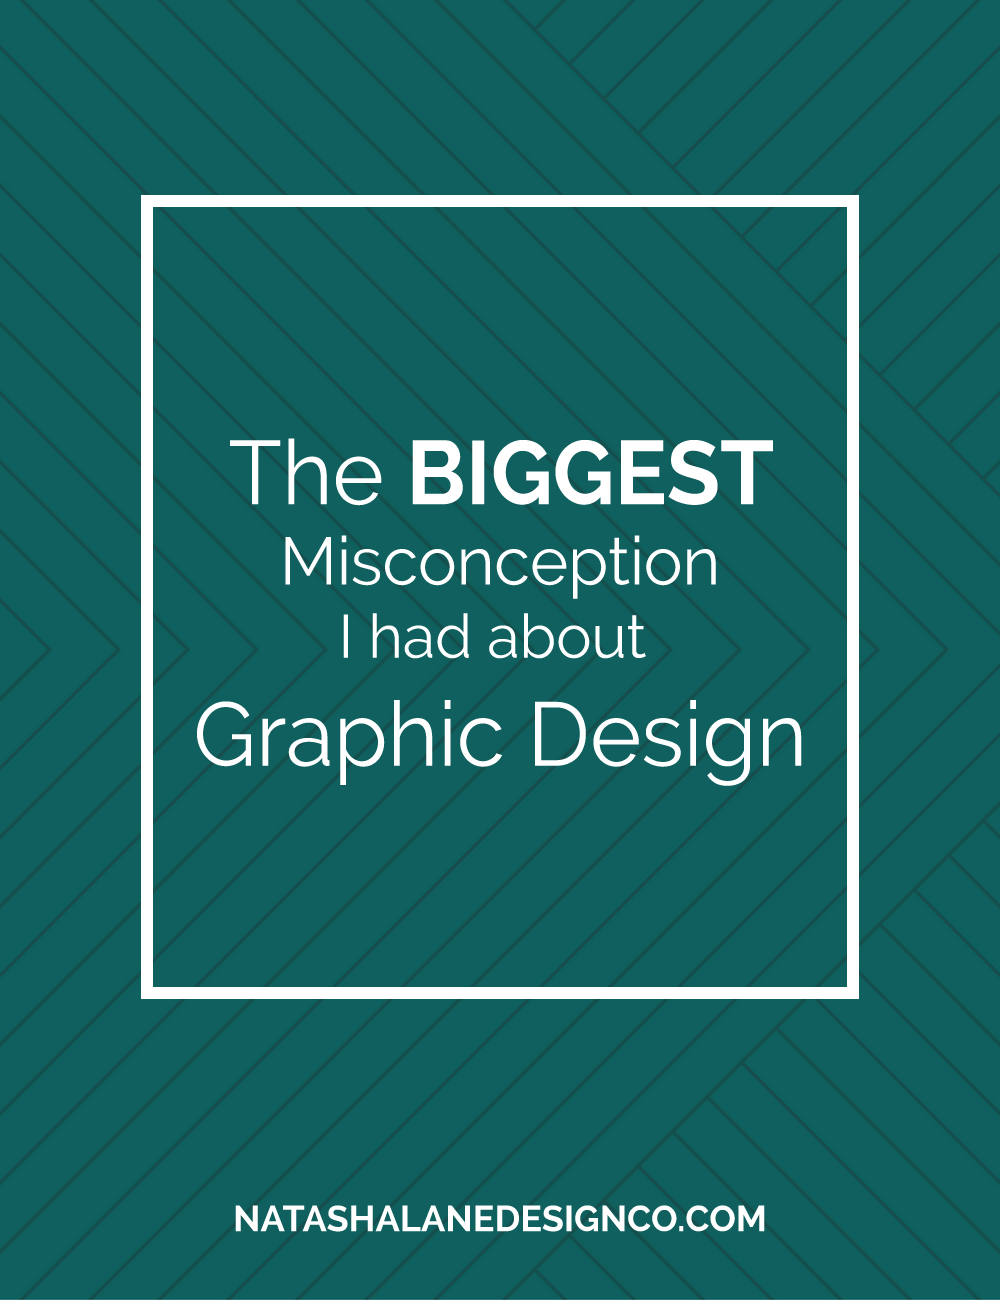 The Biggest Misconception I had about Graphic Design blog title